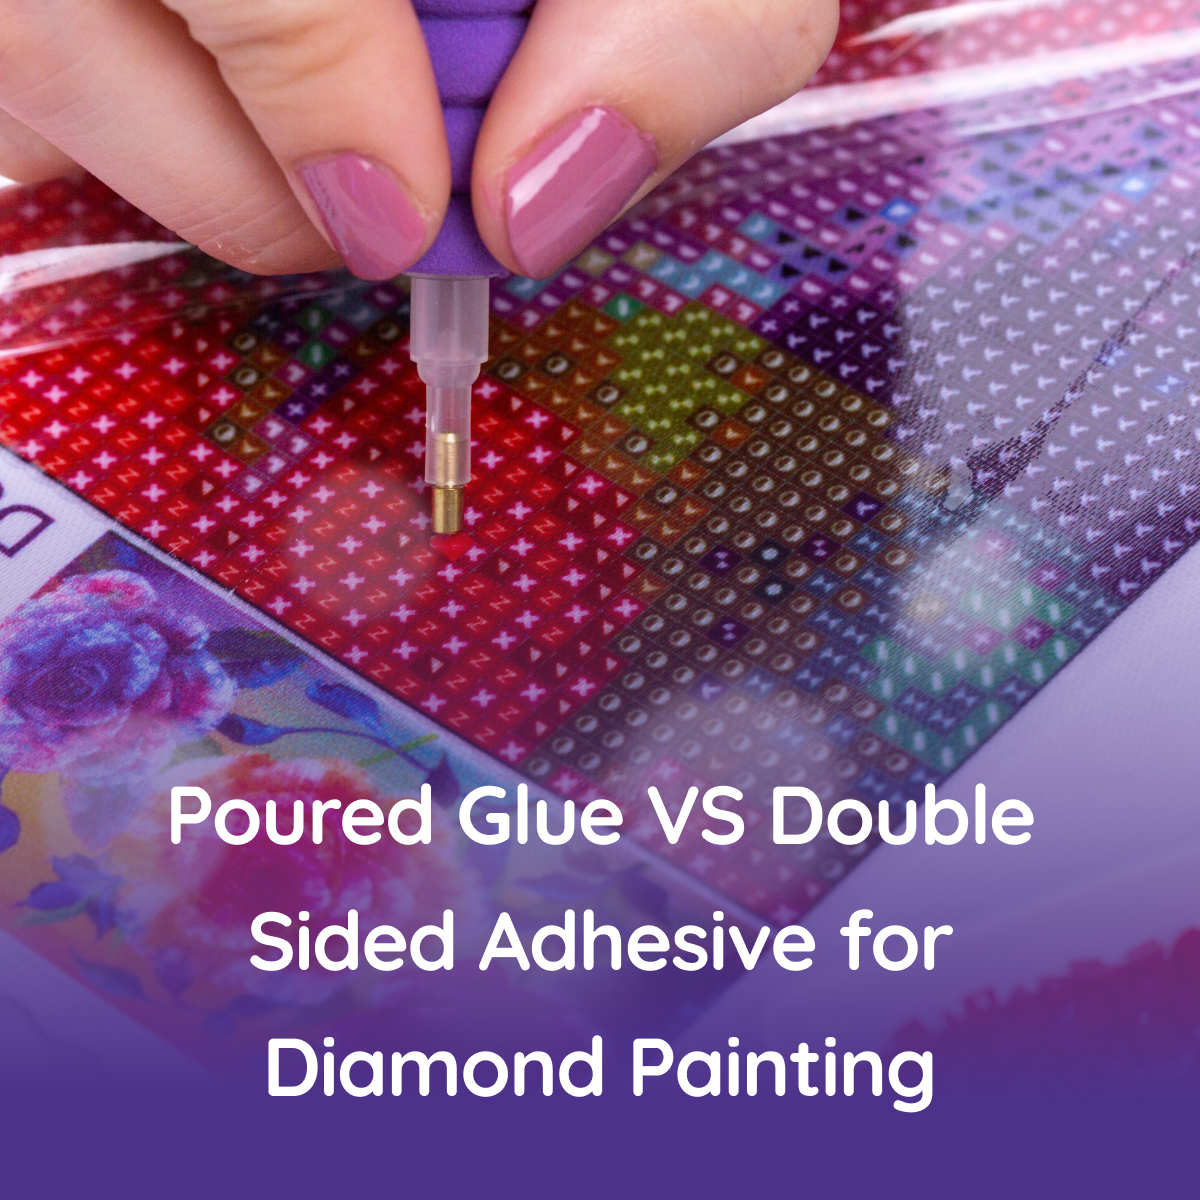 Poured Glue VS Double Sided Adhesive for Diamond Painting